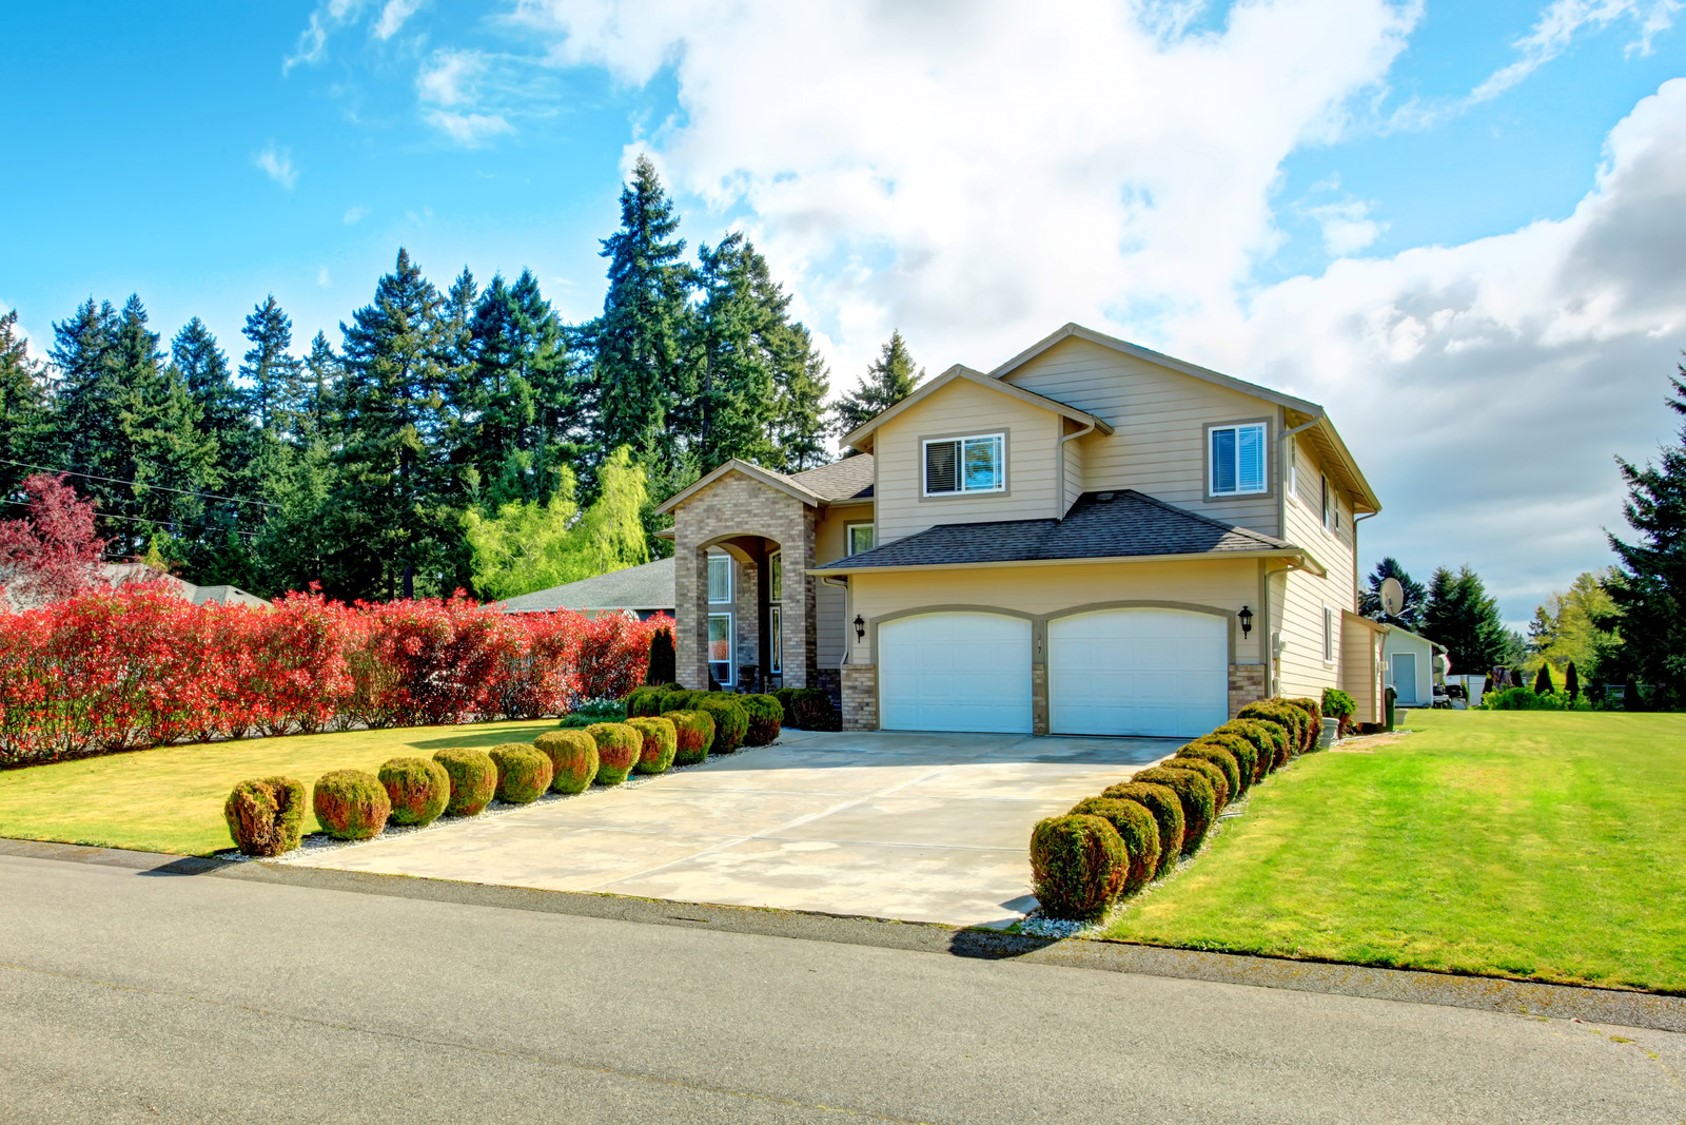 5 Budget Friendly Ways to Add Curb Appeal To Your Home